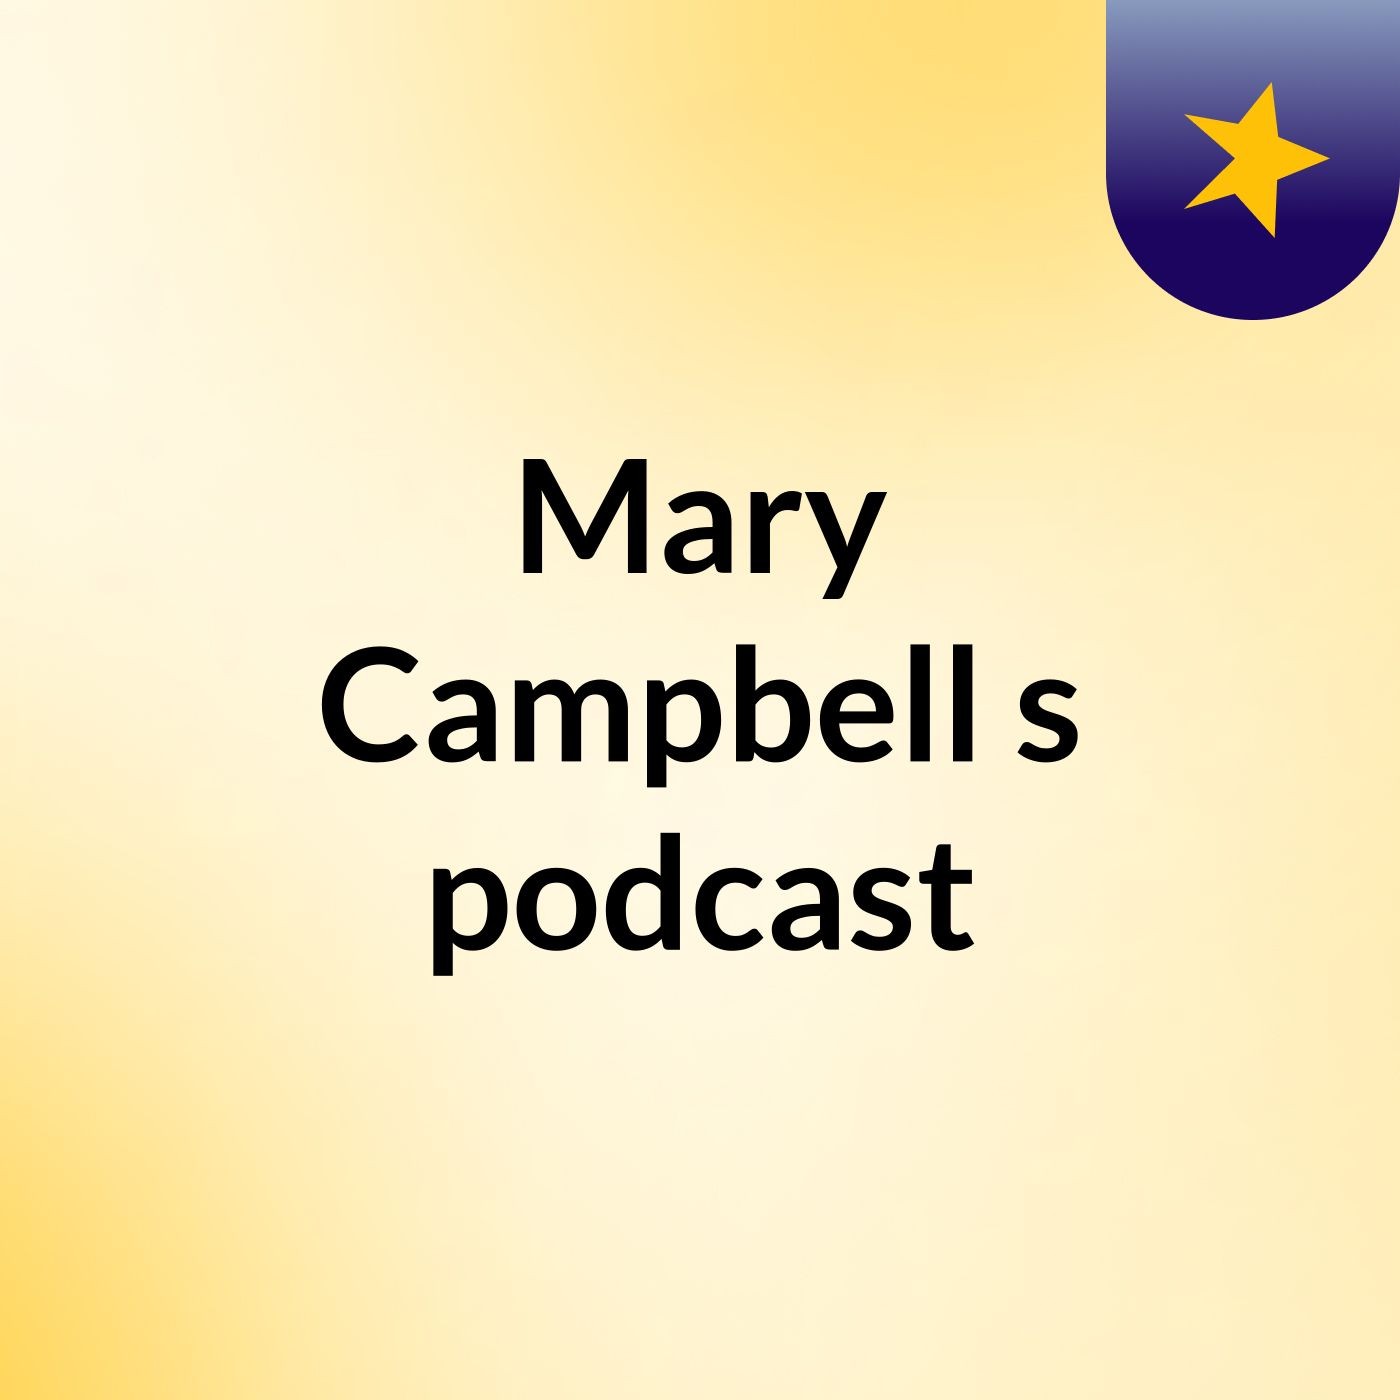 Episode 5 - Mary Campbell's podcast